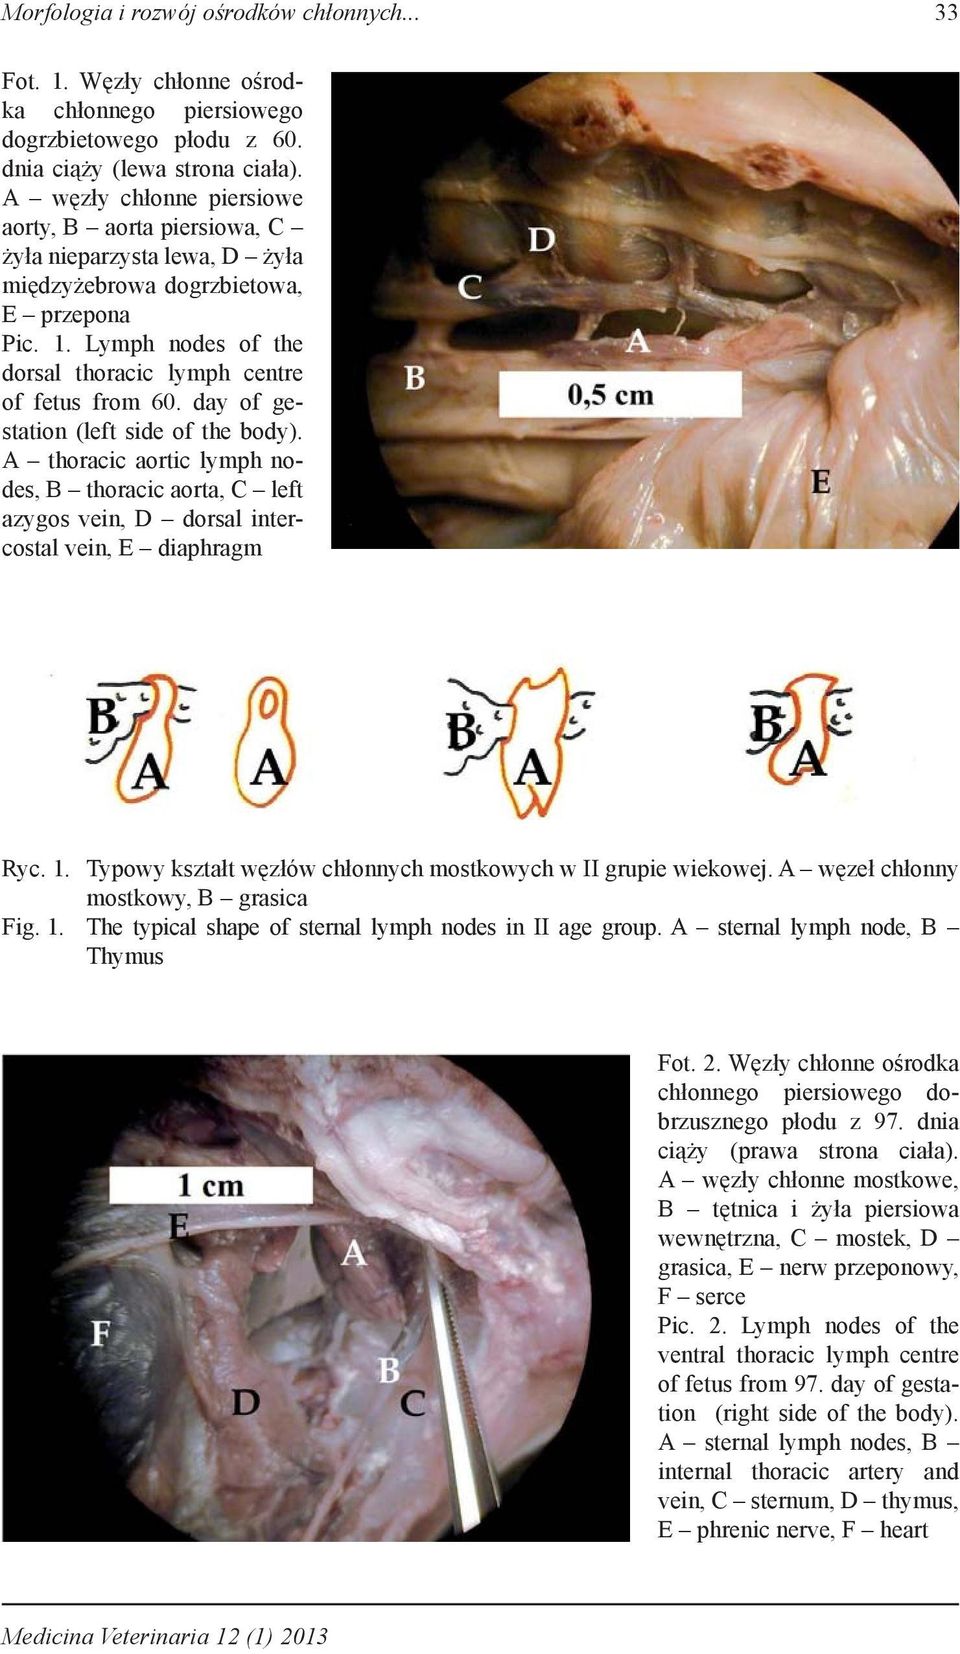 day of gestation (left side of the body). A thoracic aortic lymph nodes, B thoracic aorta, C left azygos vein, D dorsal intercostal vein, E diaphragm Ryc. 1.